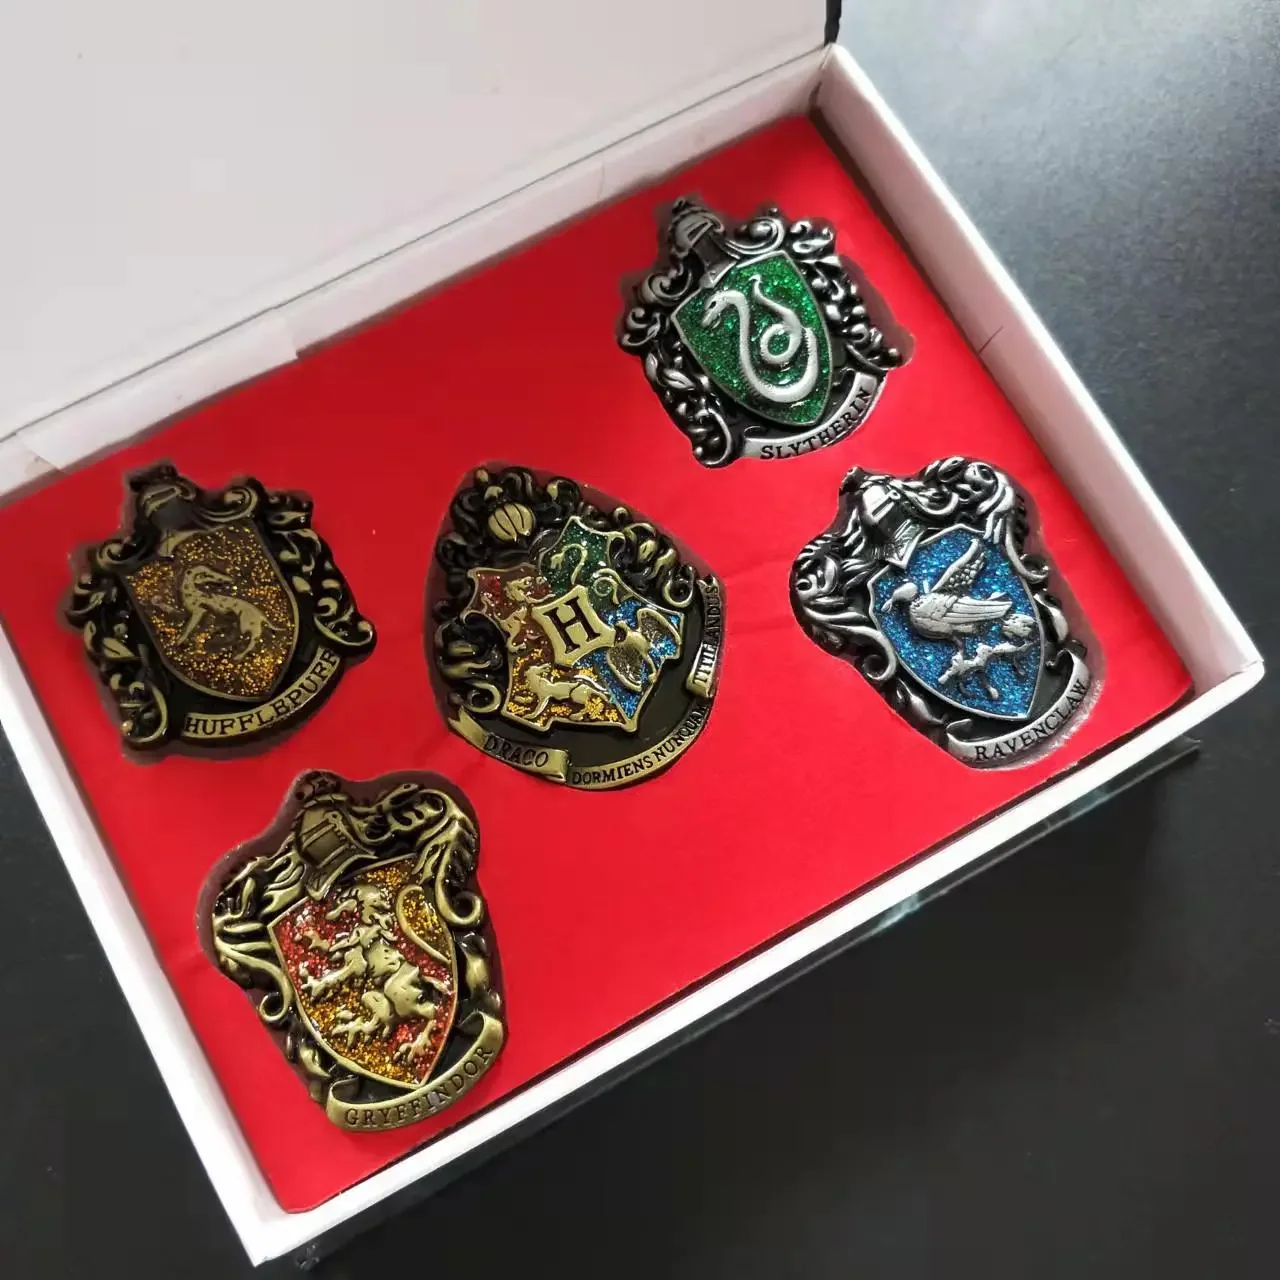 Universal Pin - Harry Potter Ravenclaw Crest Pin On Pin